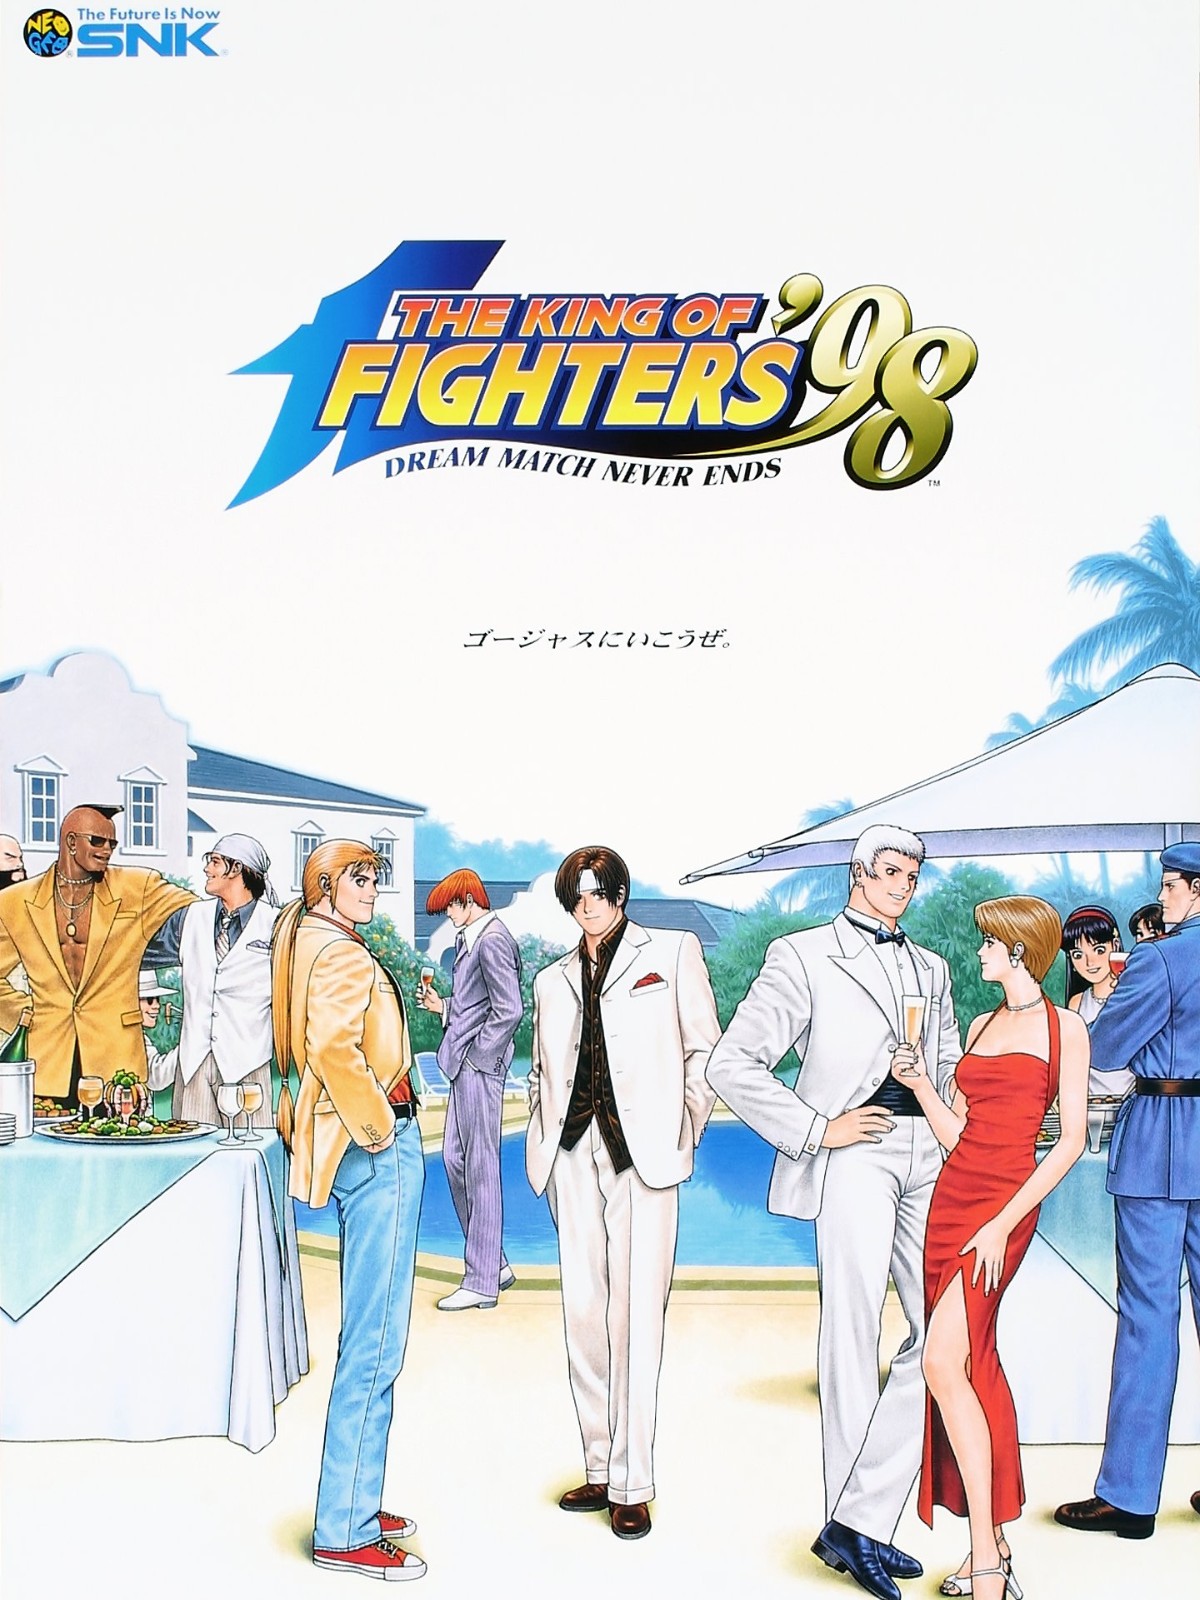 King of fighters 98